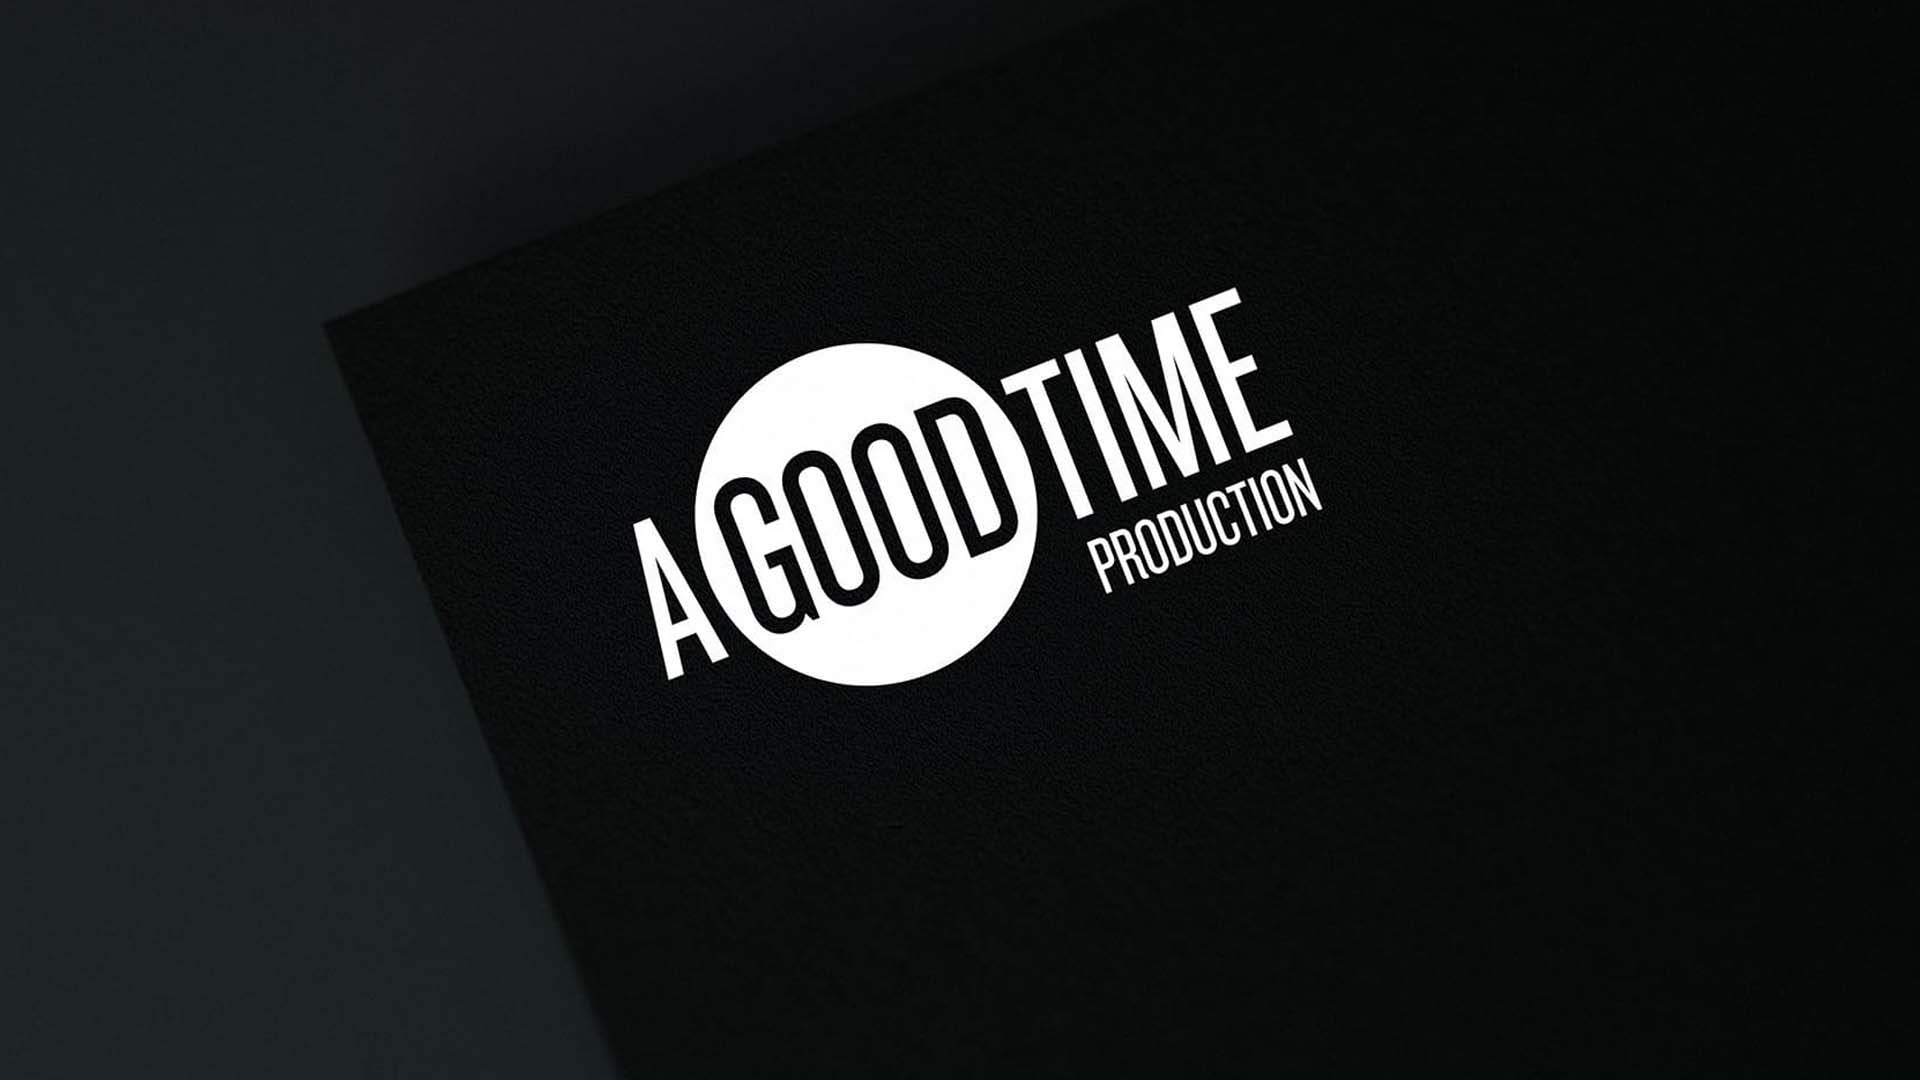 A Good Time Production